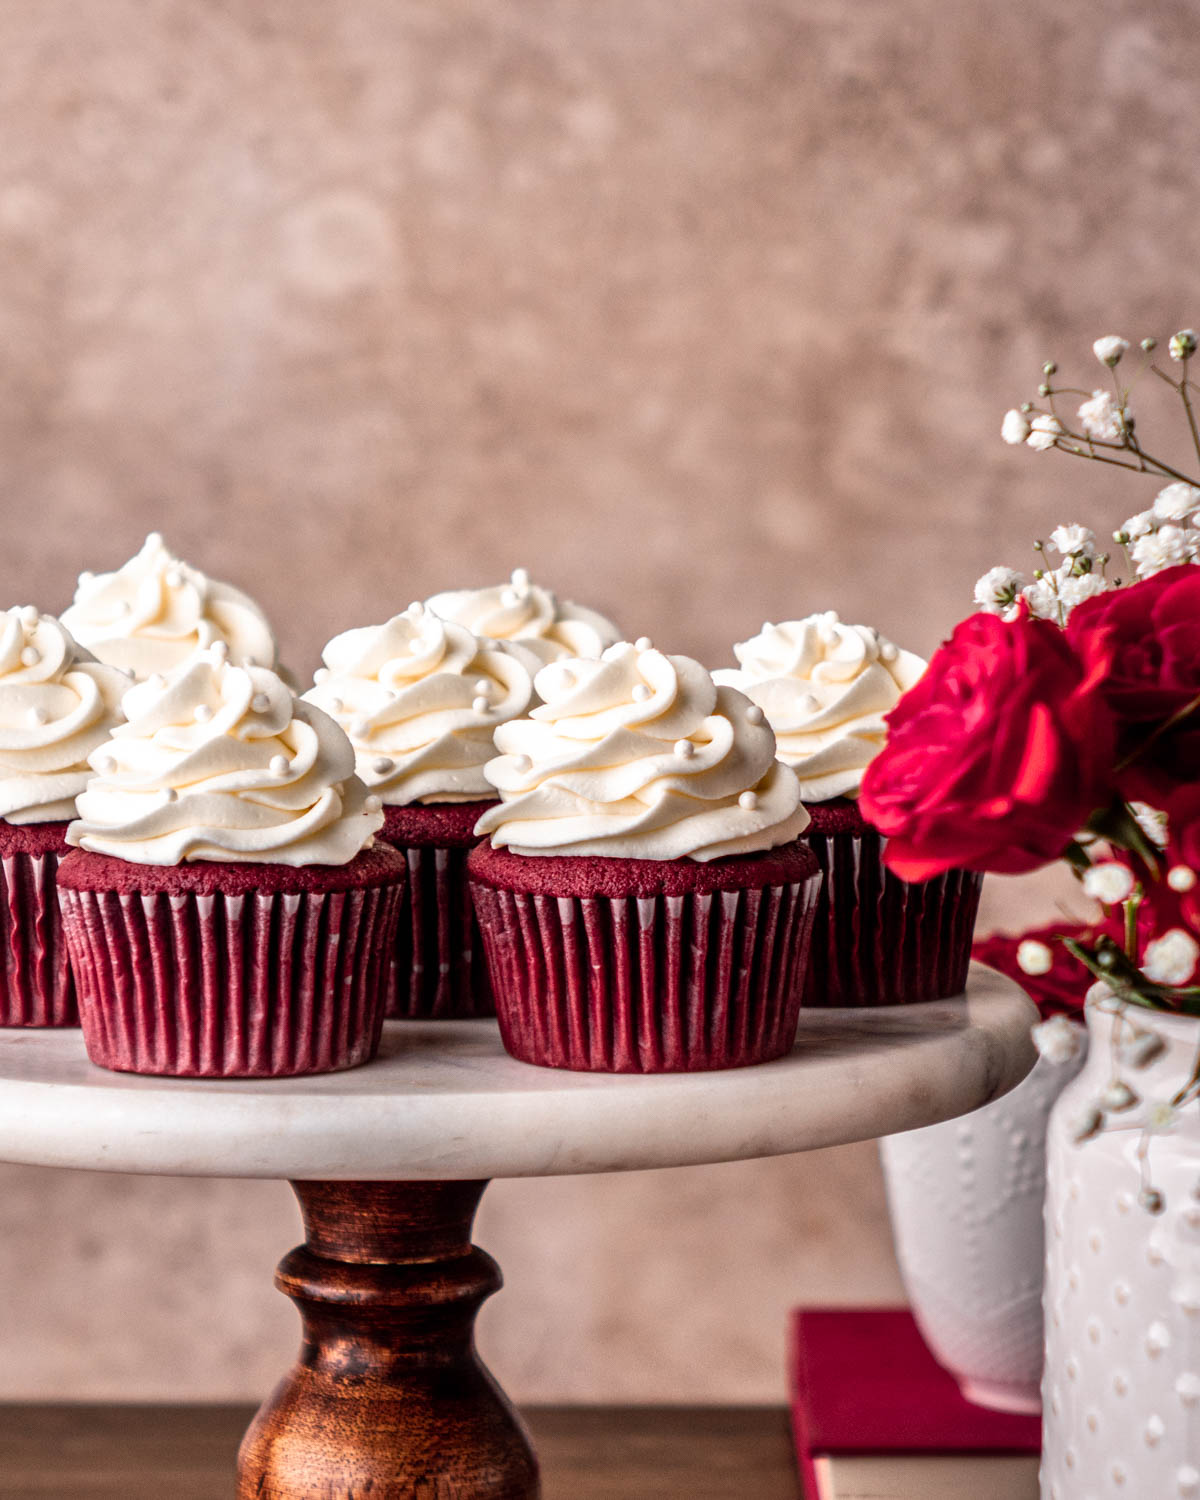 red velvet cupcakes on a cake stand with red roses in front